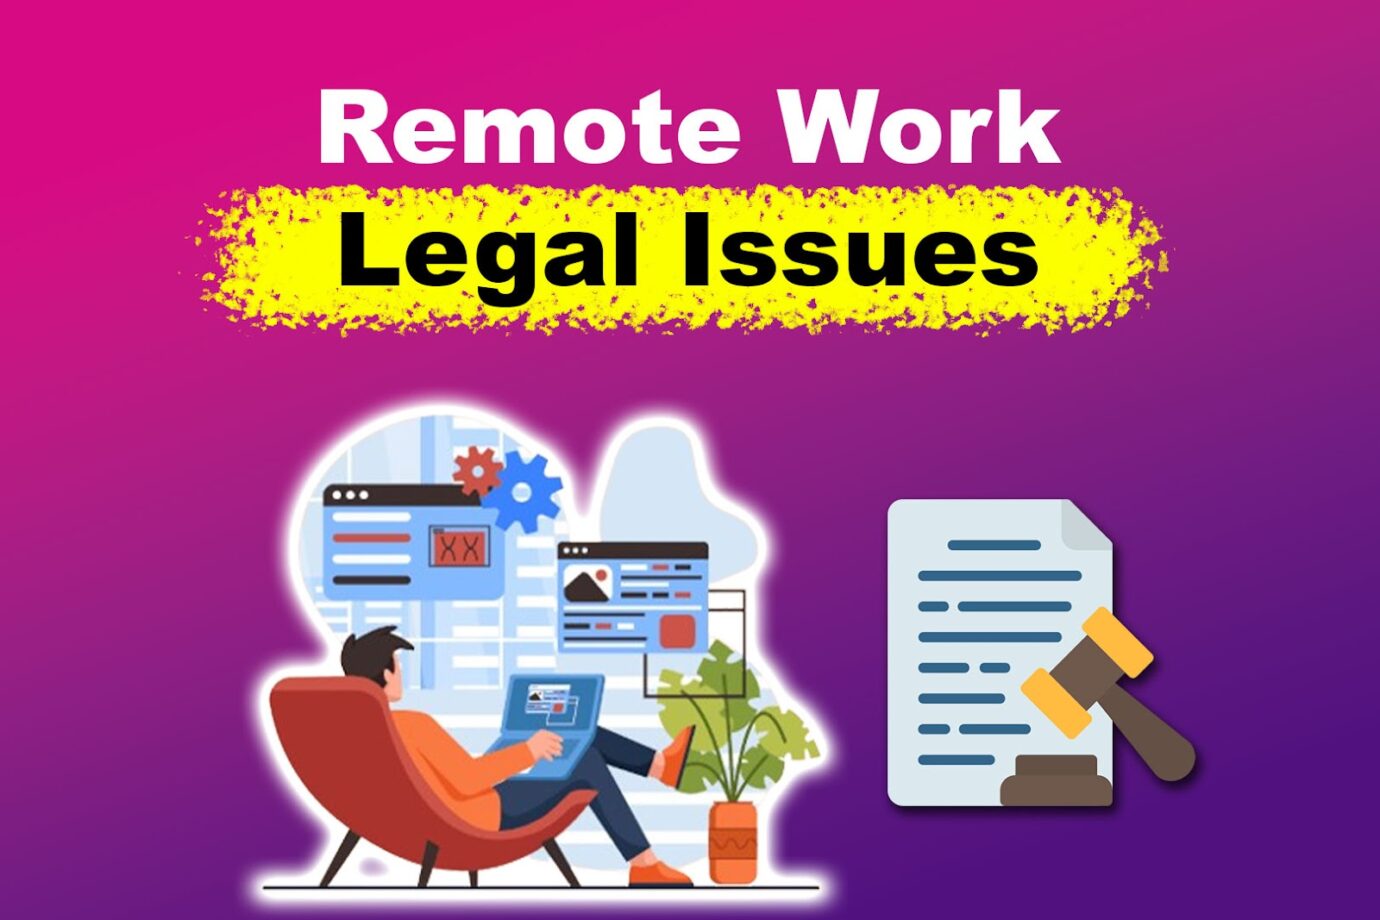 Remote Work Legal Issues